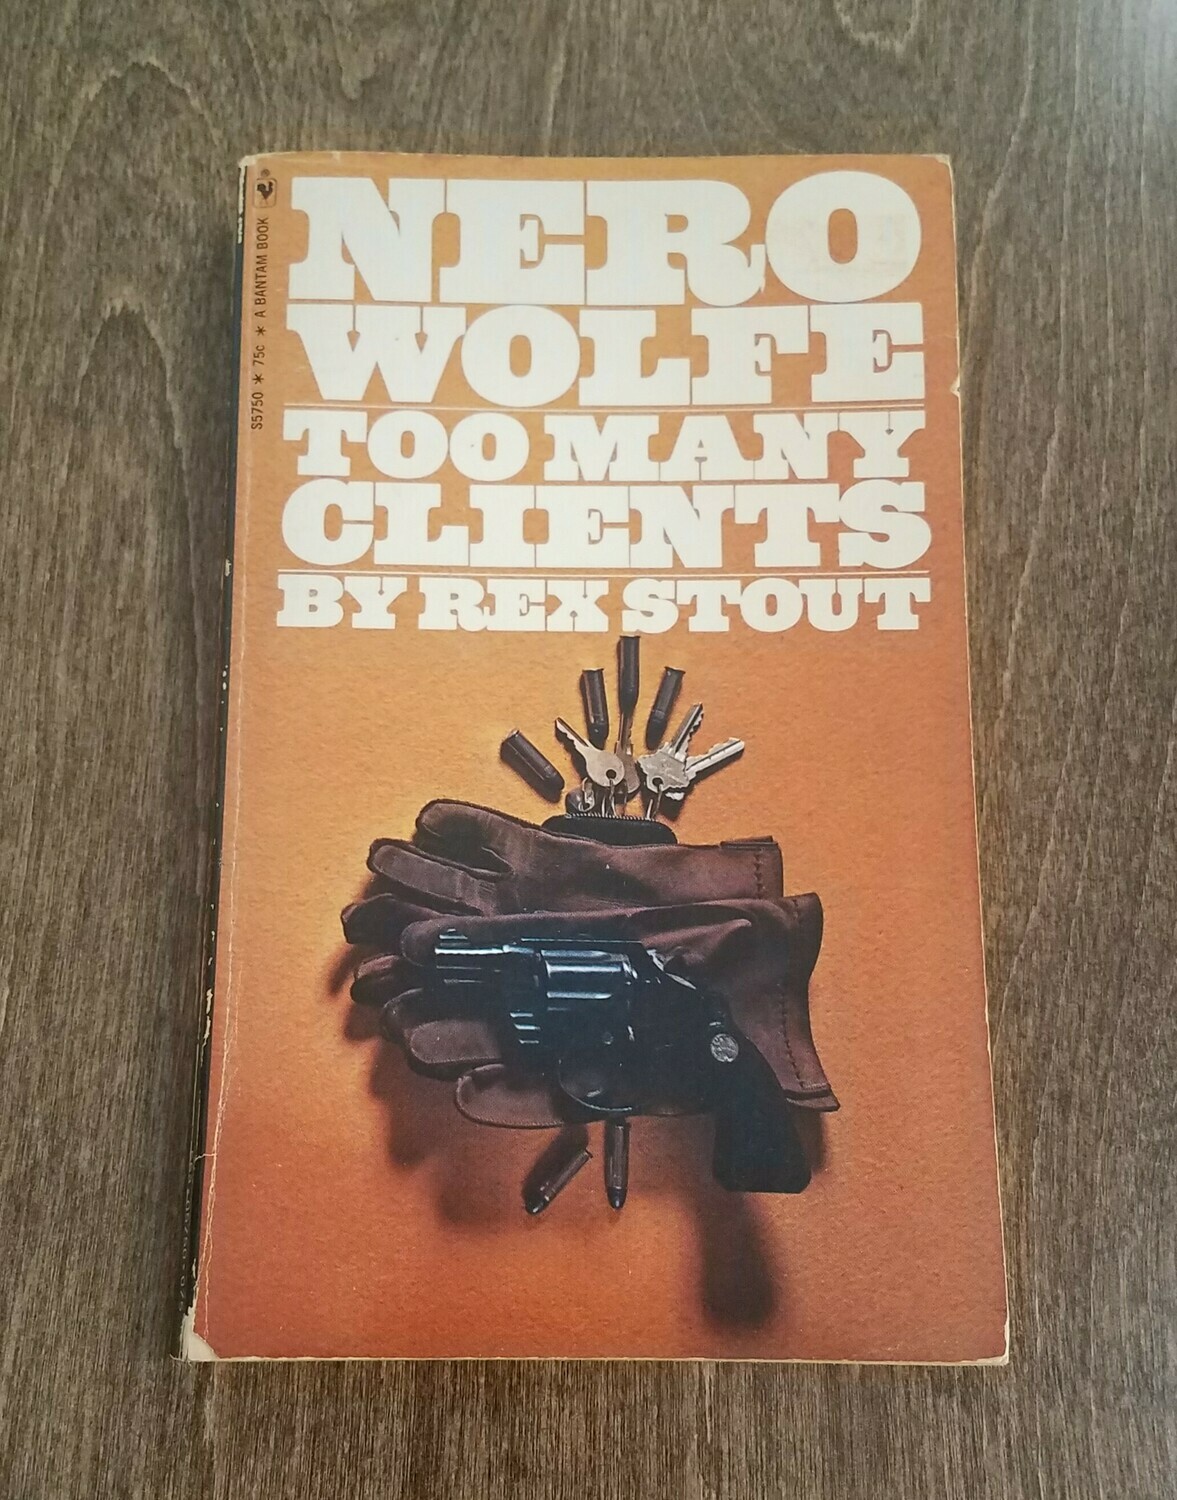 Nero Wolfe: Too Many Clients by Rex Stout